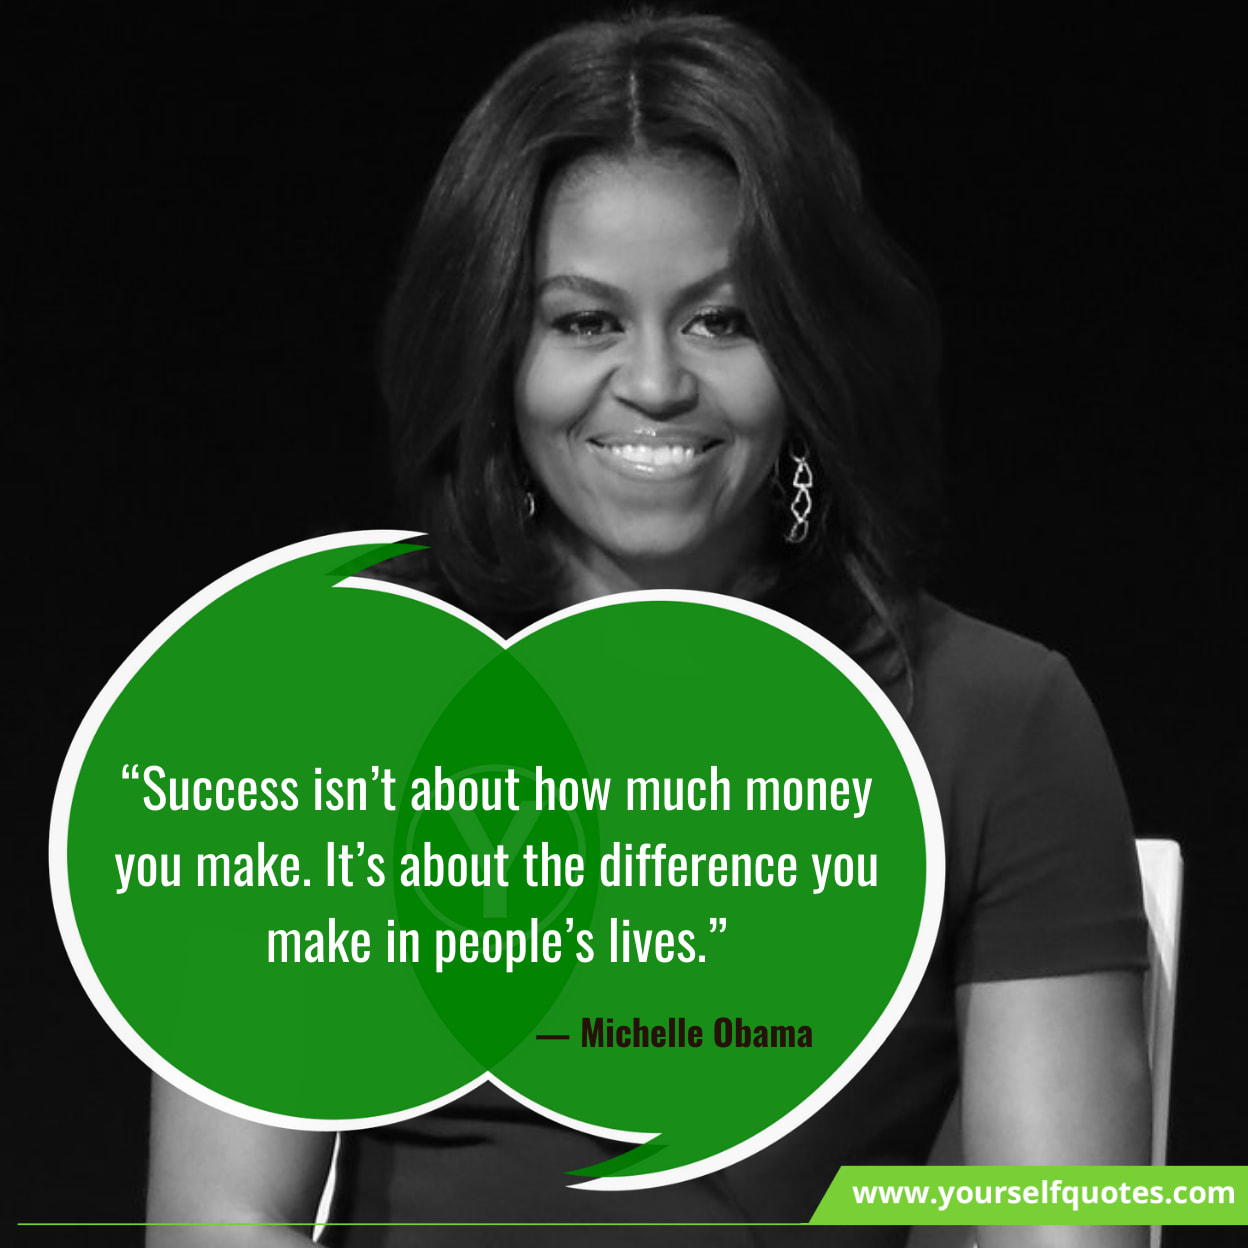 Michelle Obama Quotes On Success